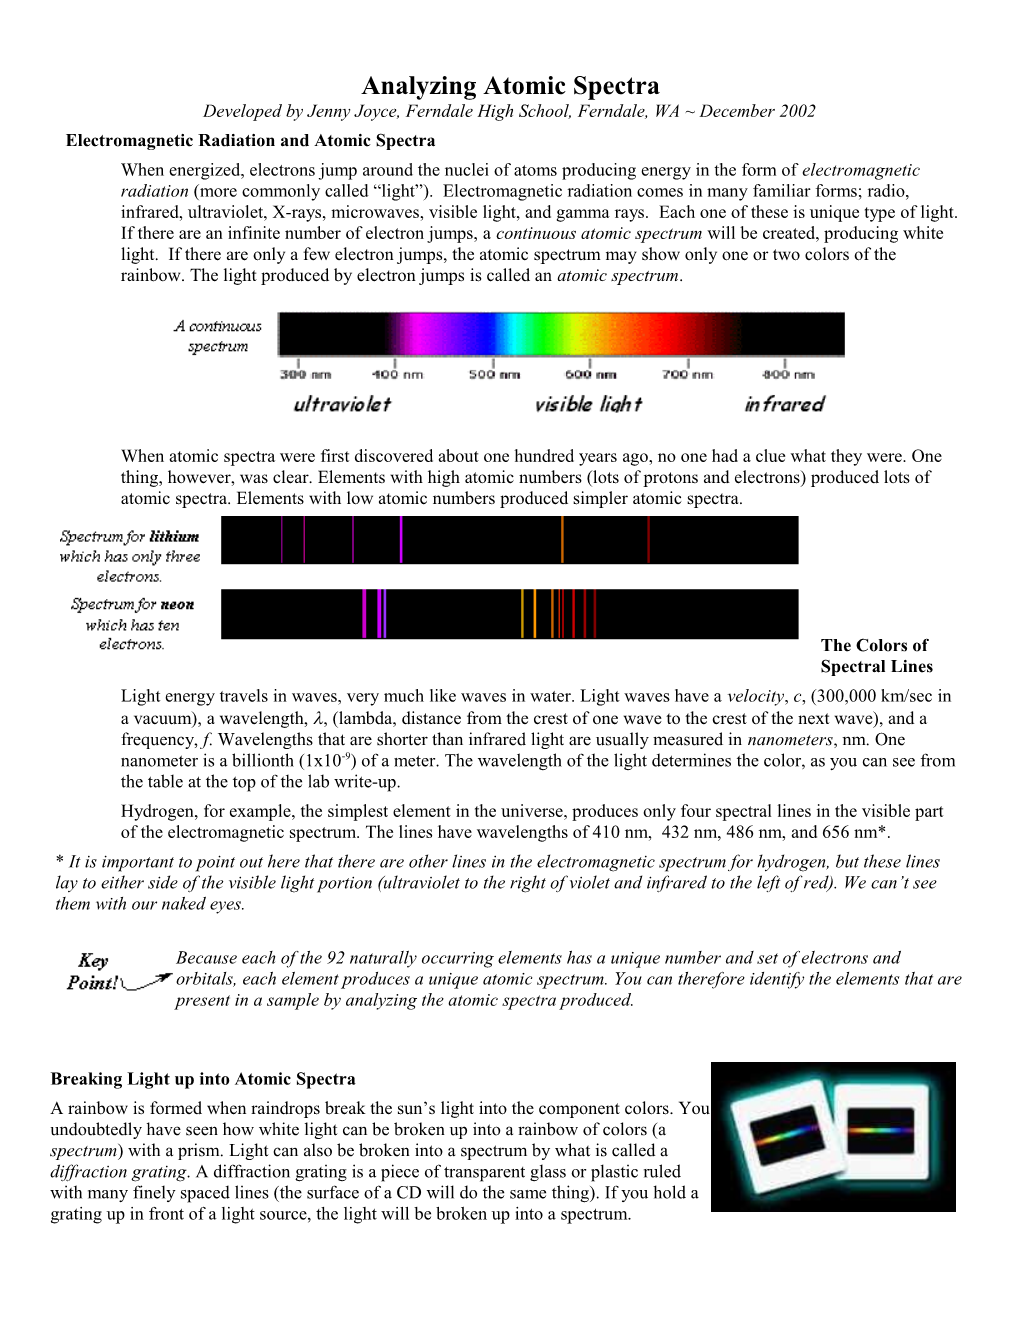 Electromagnetic Radiation and Atomic Spectra